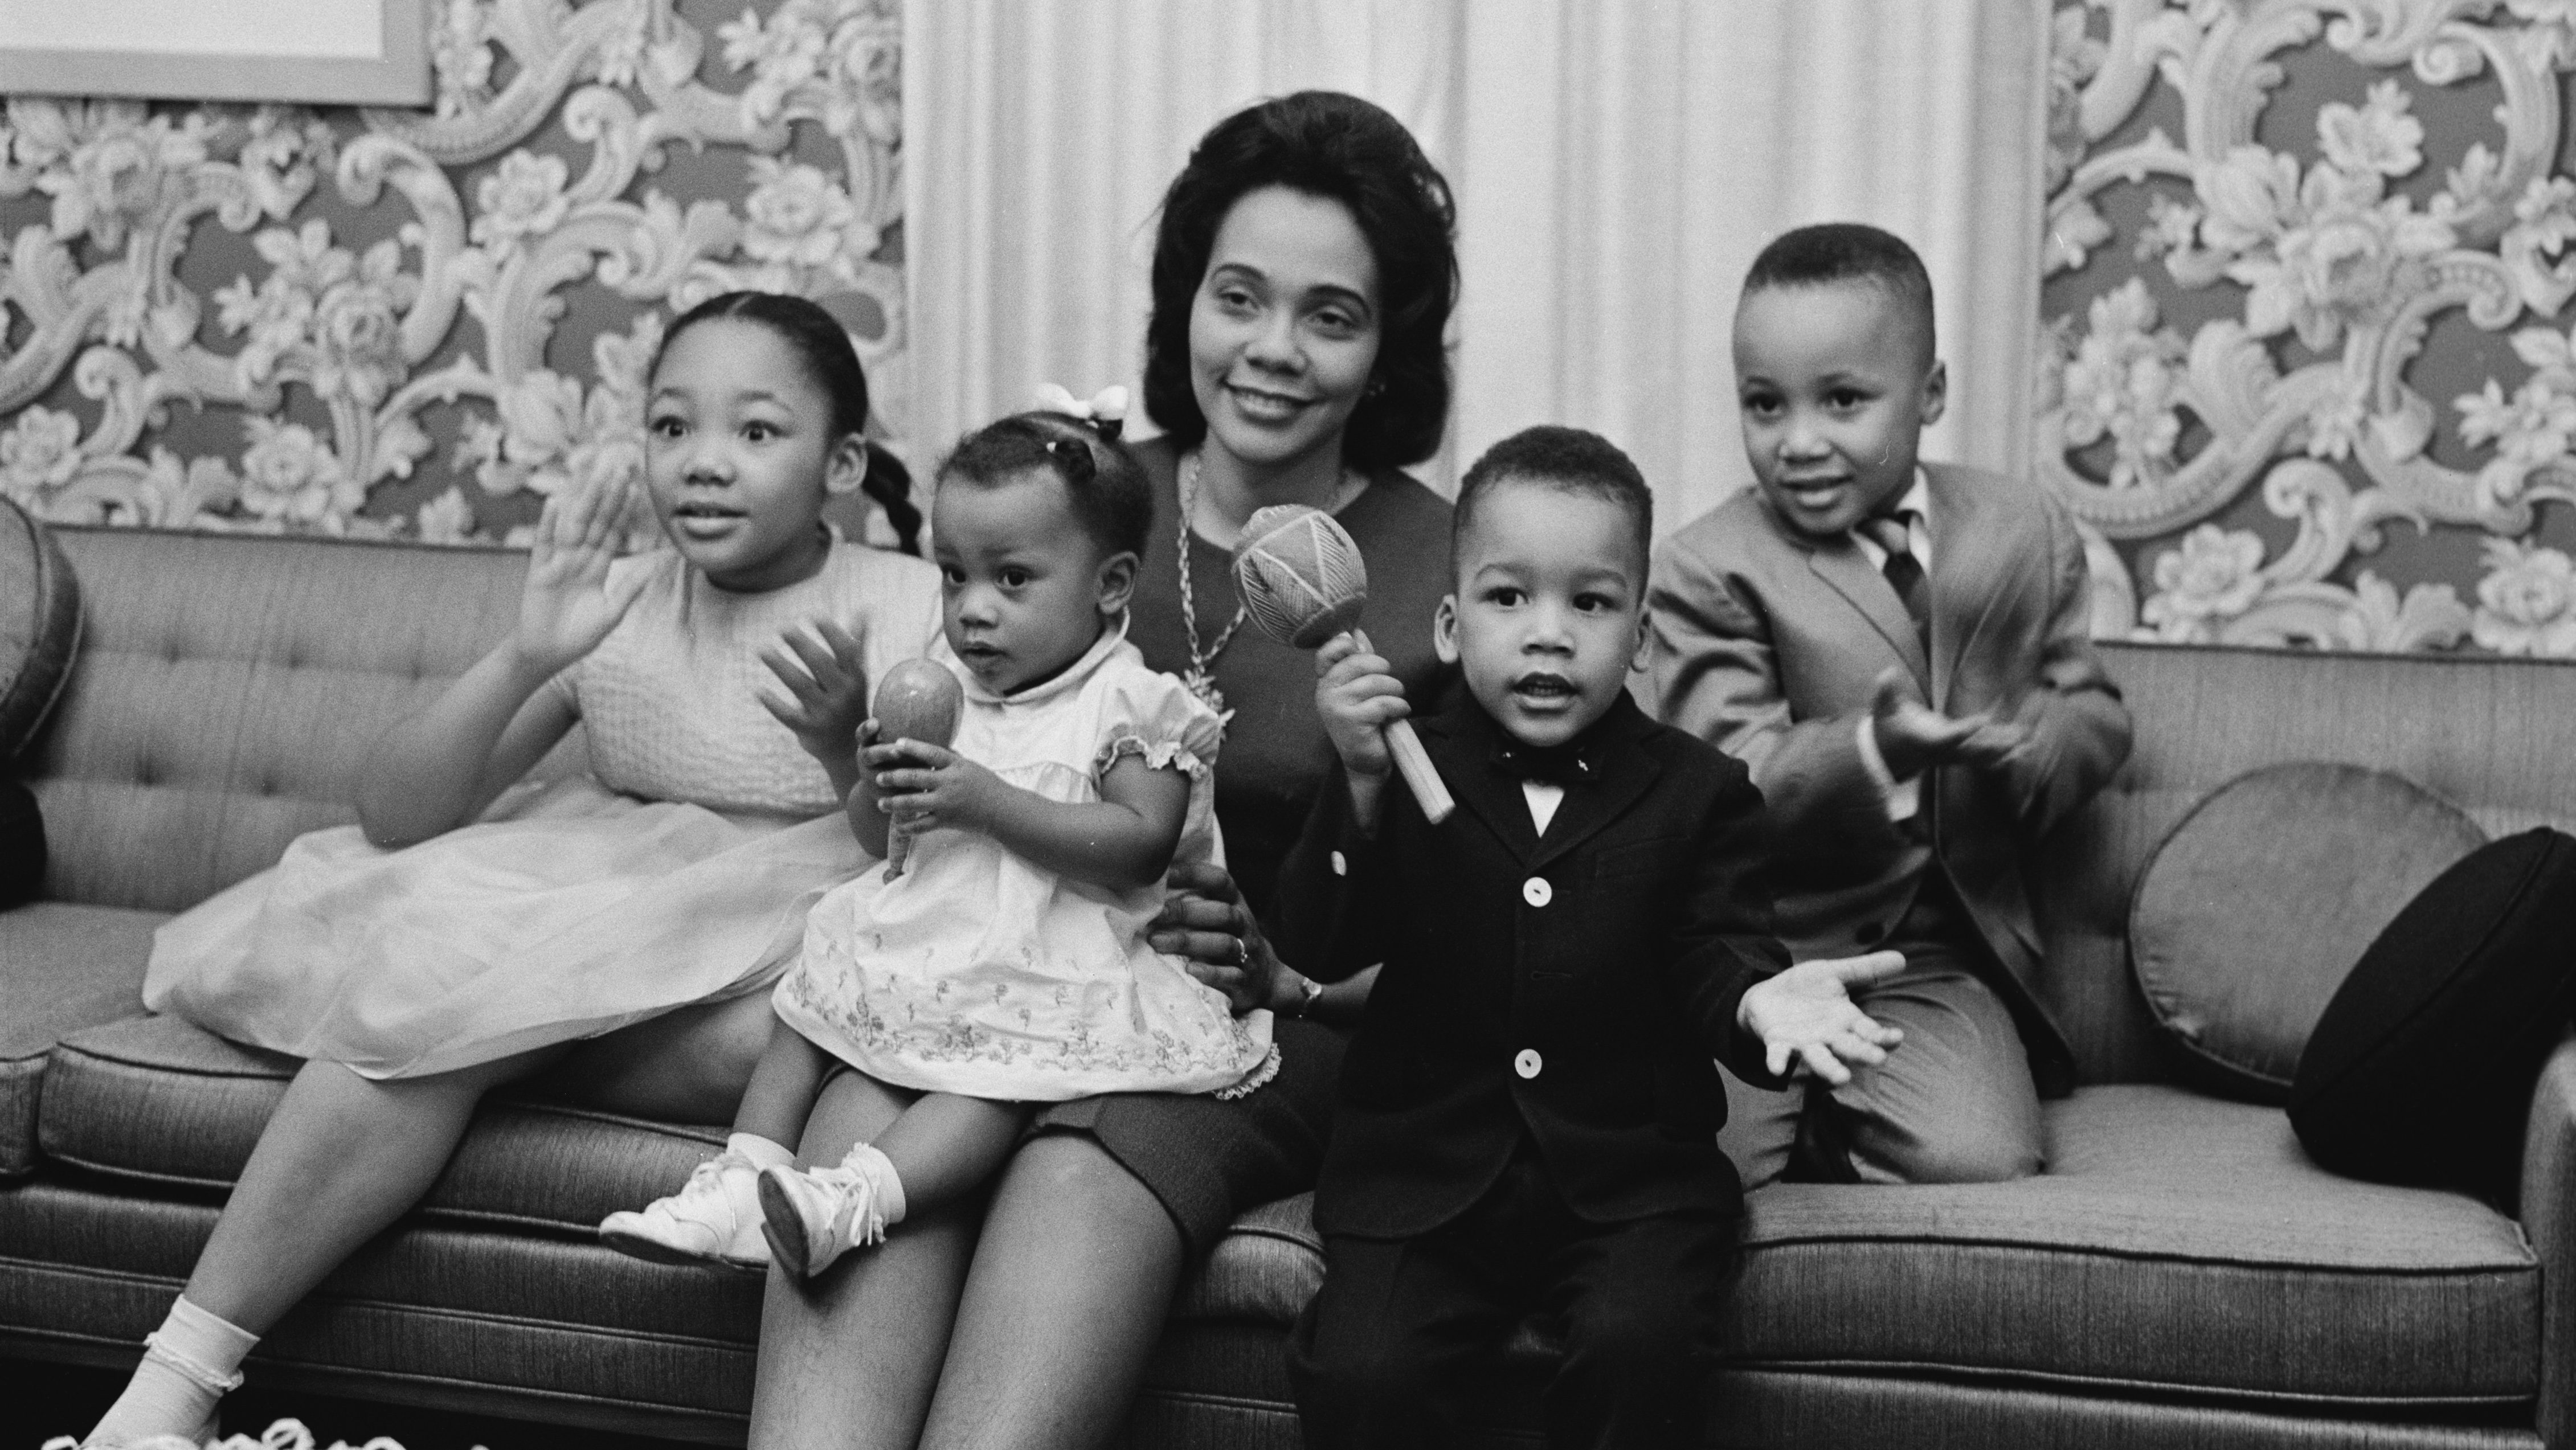 Dr. Martin Luther King, Jr.'s children Yolanda (8), Bernice (11 months), Martin Luther King III (6), Dexter (3) with their mother Coretta Scott King in February 1964